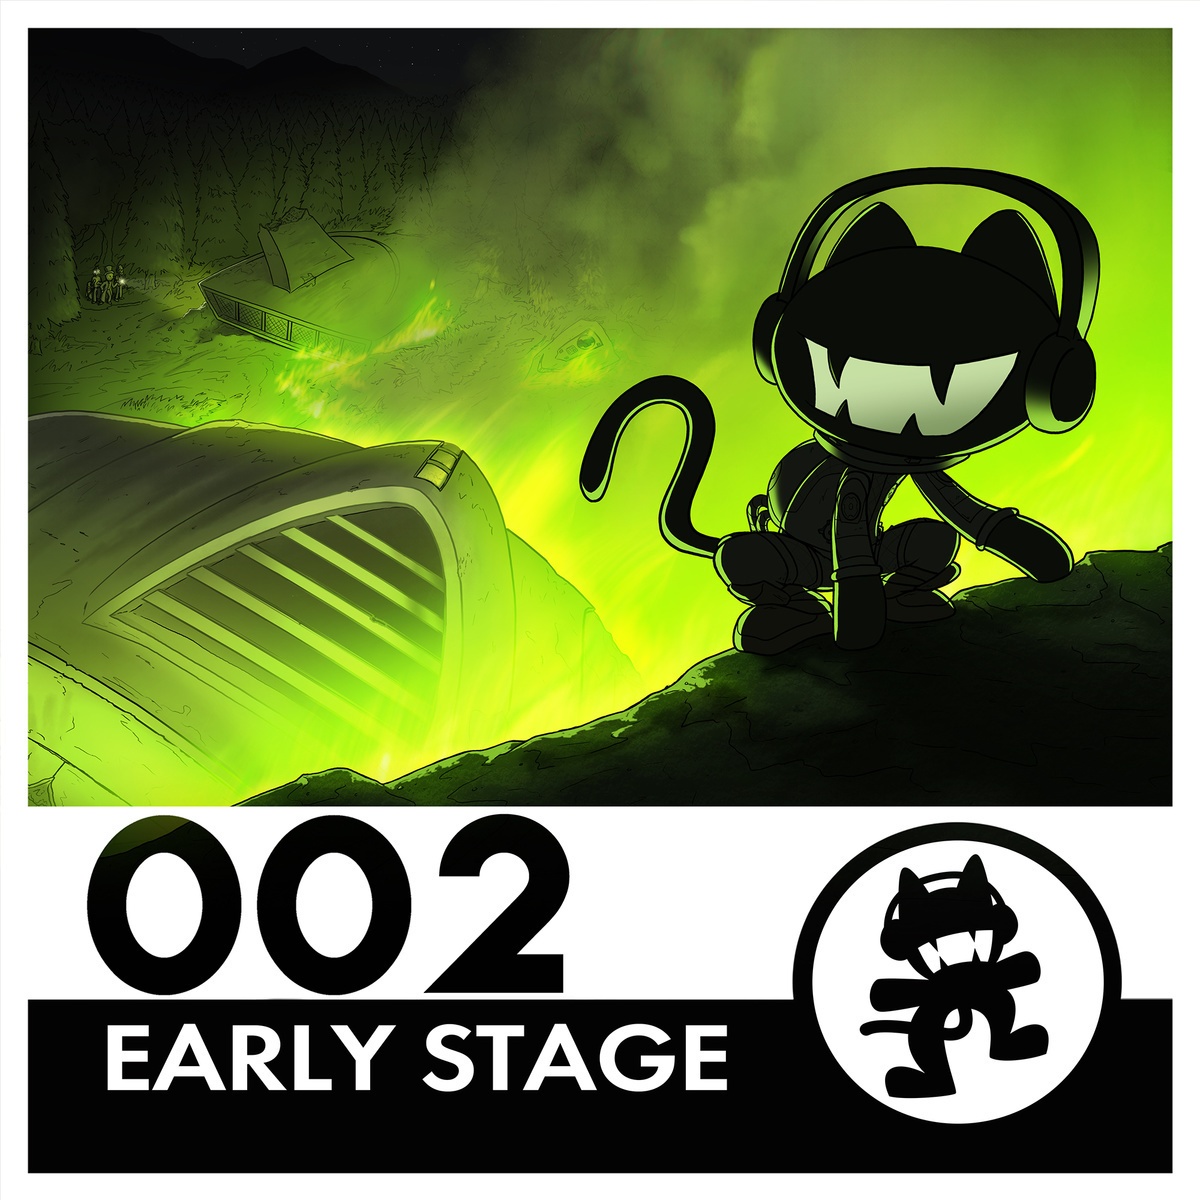 Monstercat 002 - Early Stage